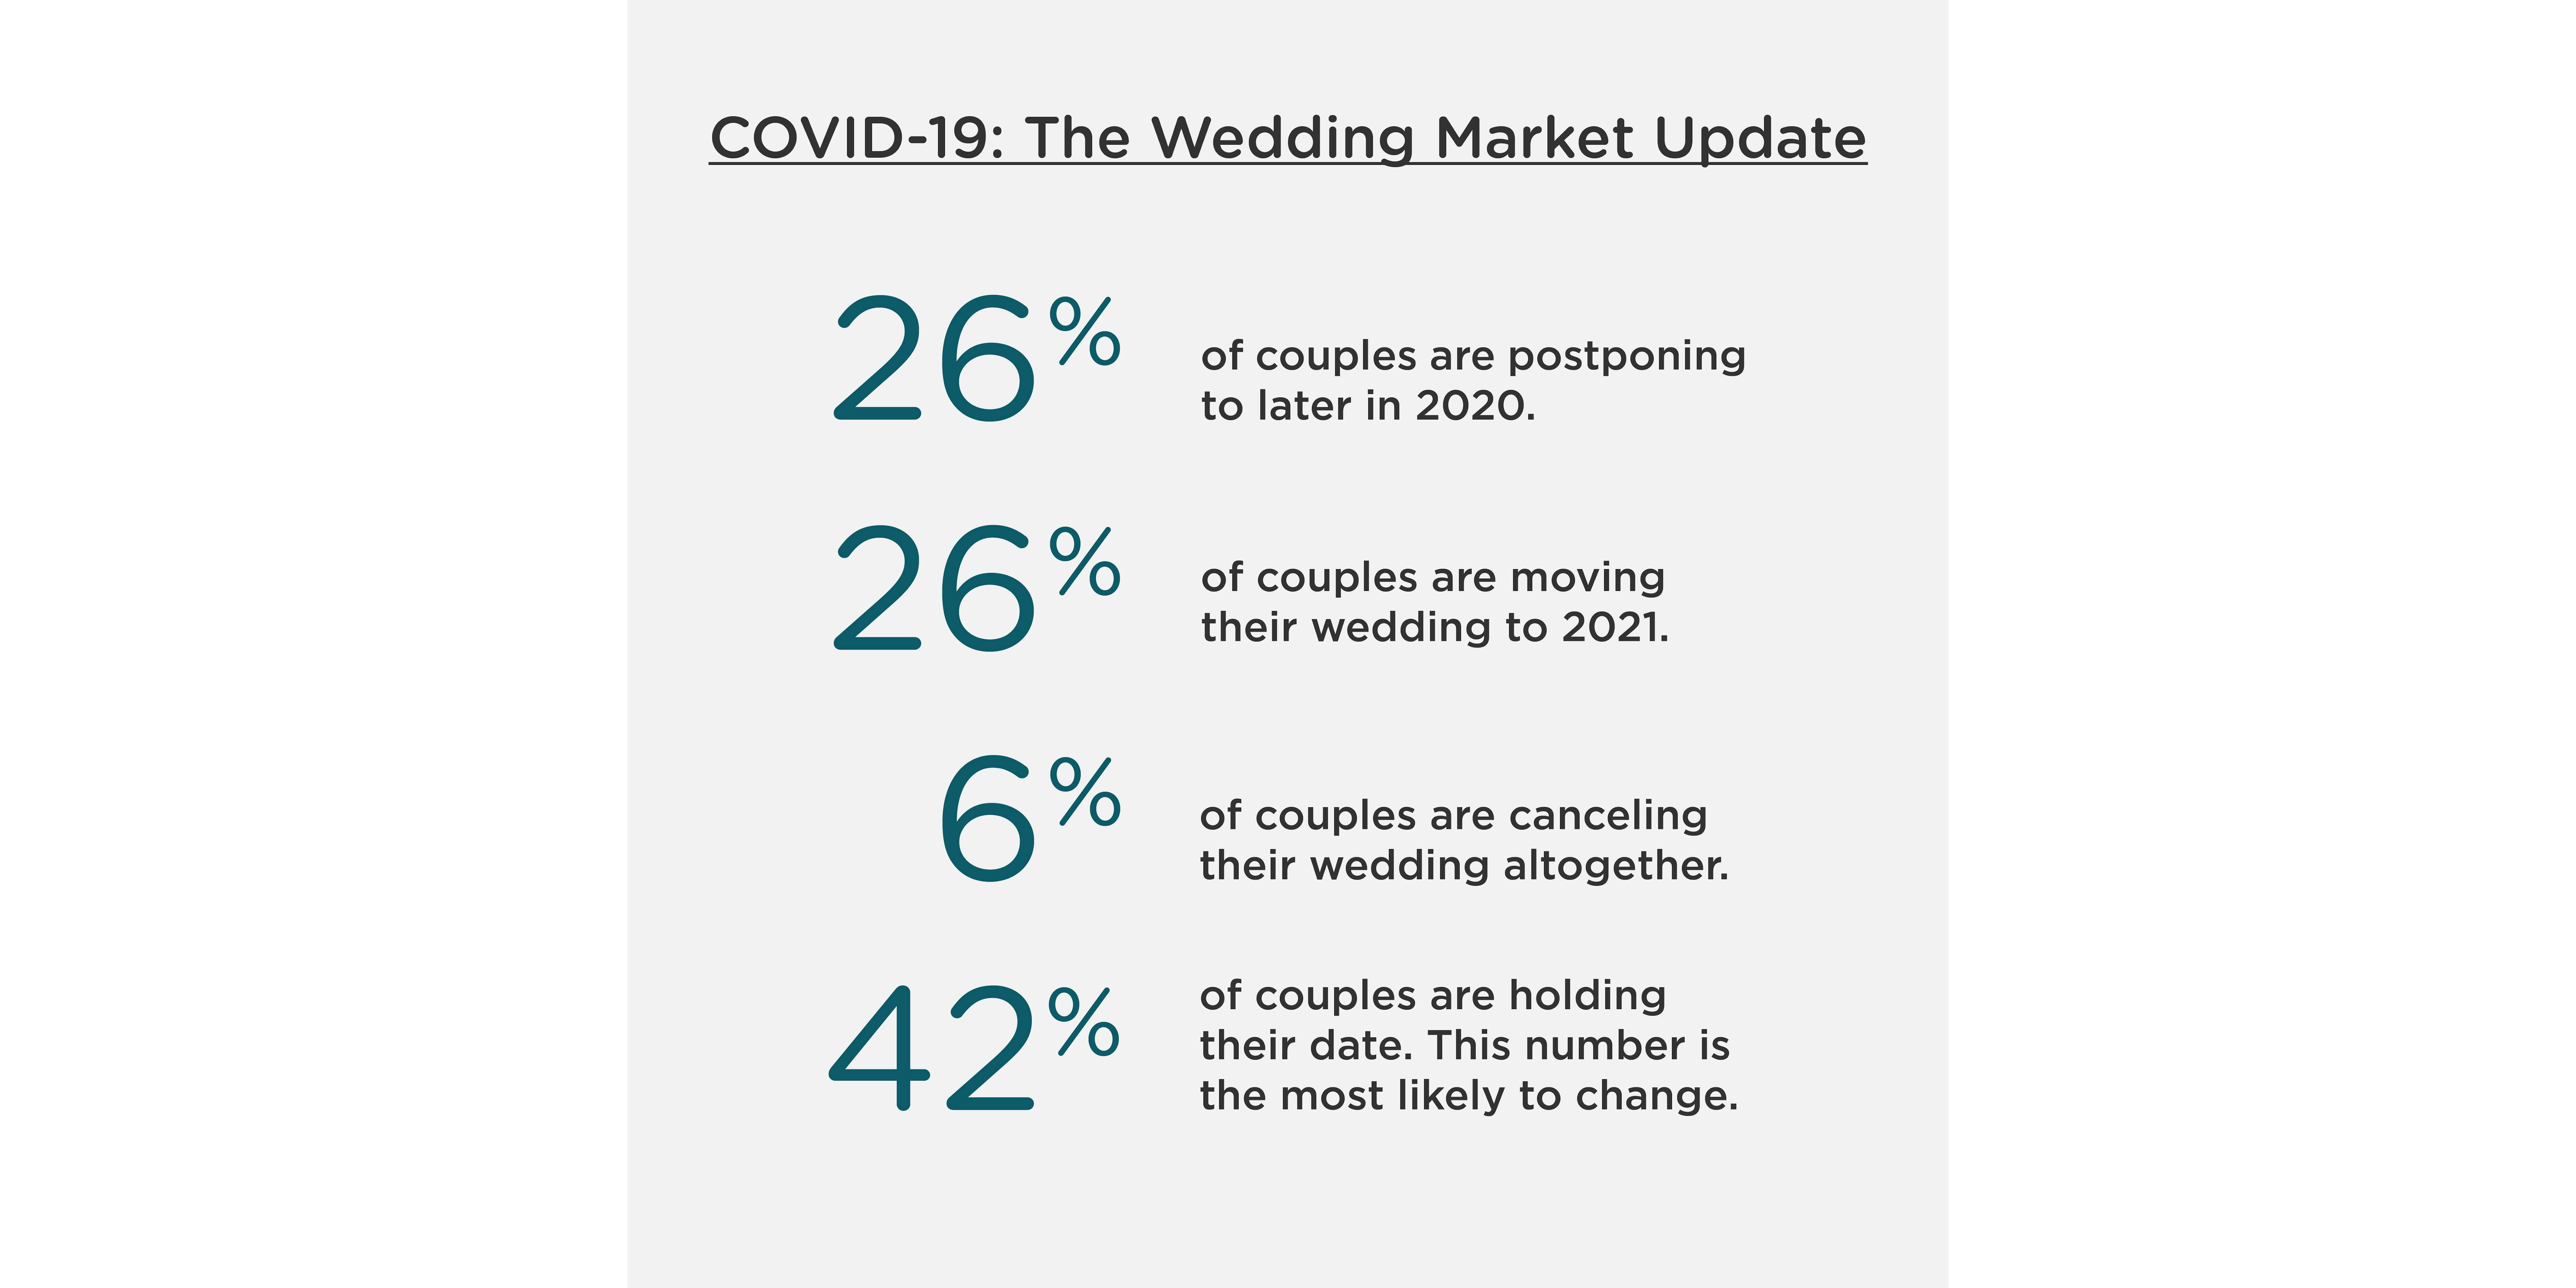 Over 50% of weddings have been postponed in the wake of COVID-19